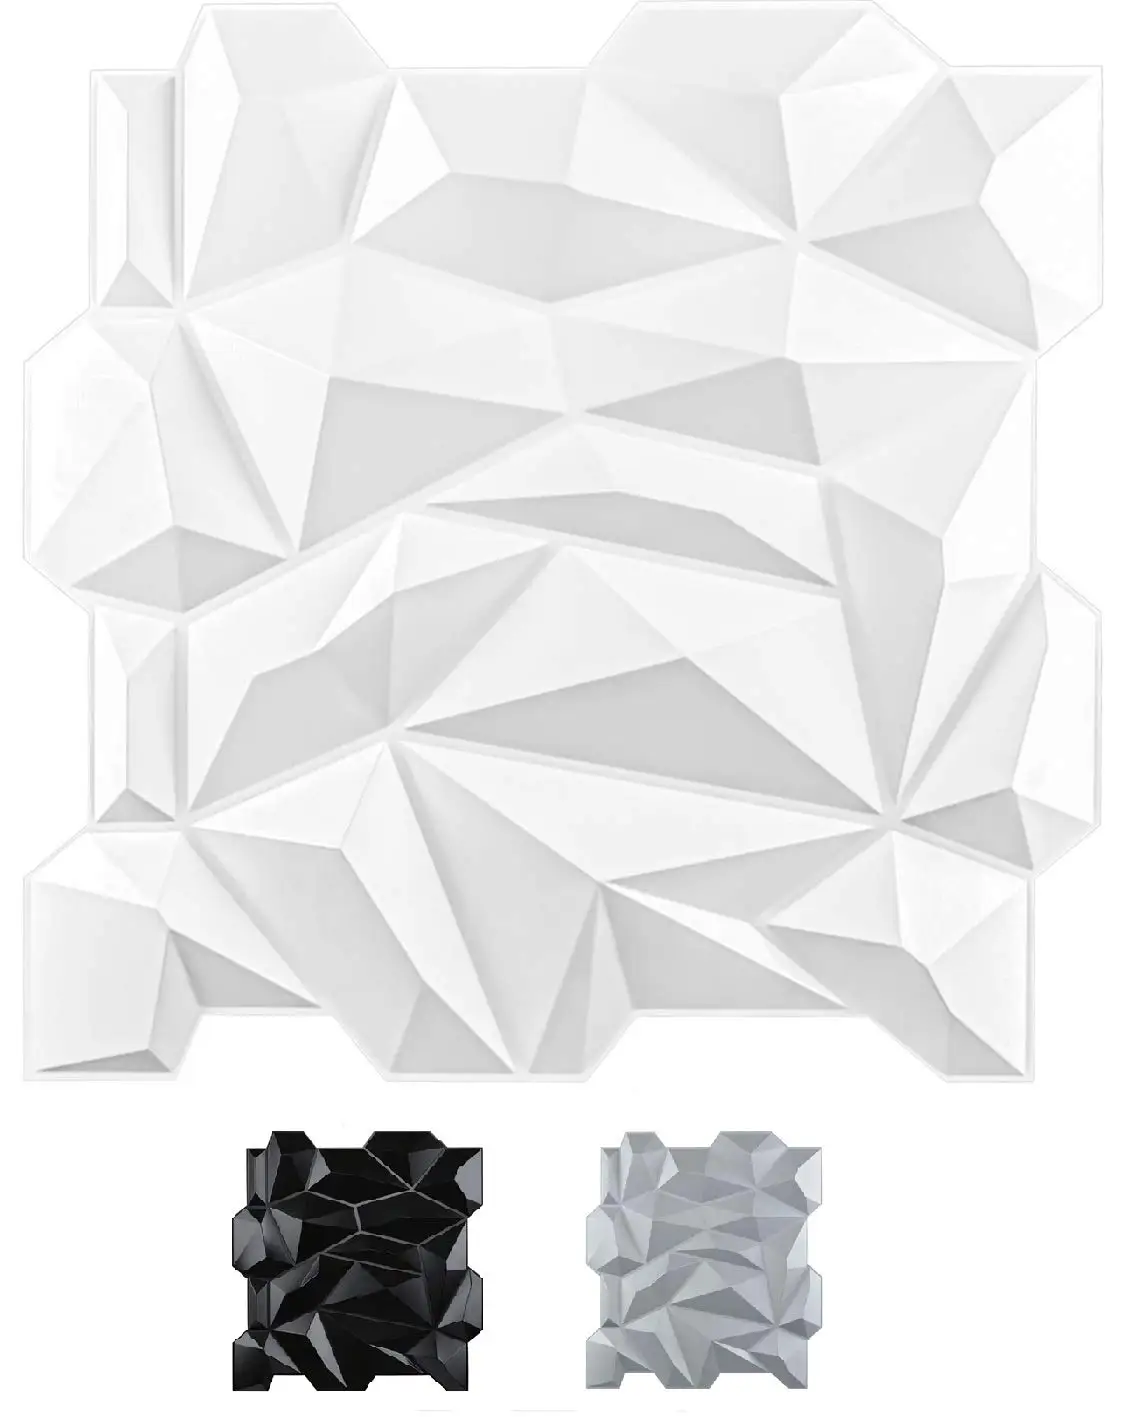 50x50cm Plastic 3D Diamond Wall Panels Jagged Matching-Matt White for Living Room Bedroom TV Background Ceiling Pack of 12 Tiles jagged alliance 3 pc